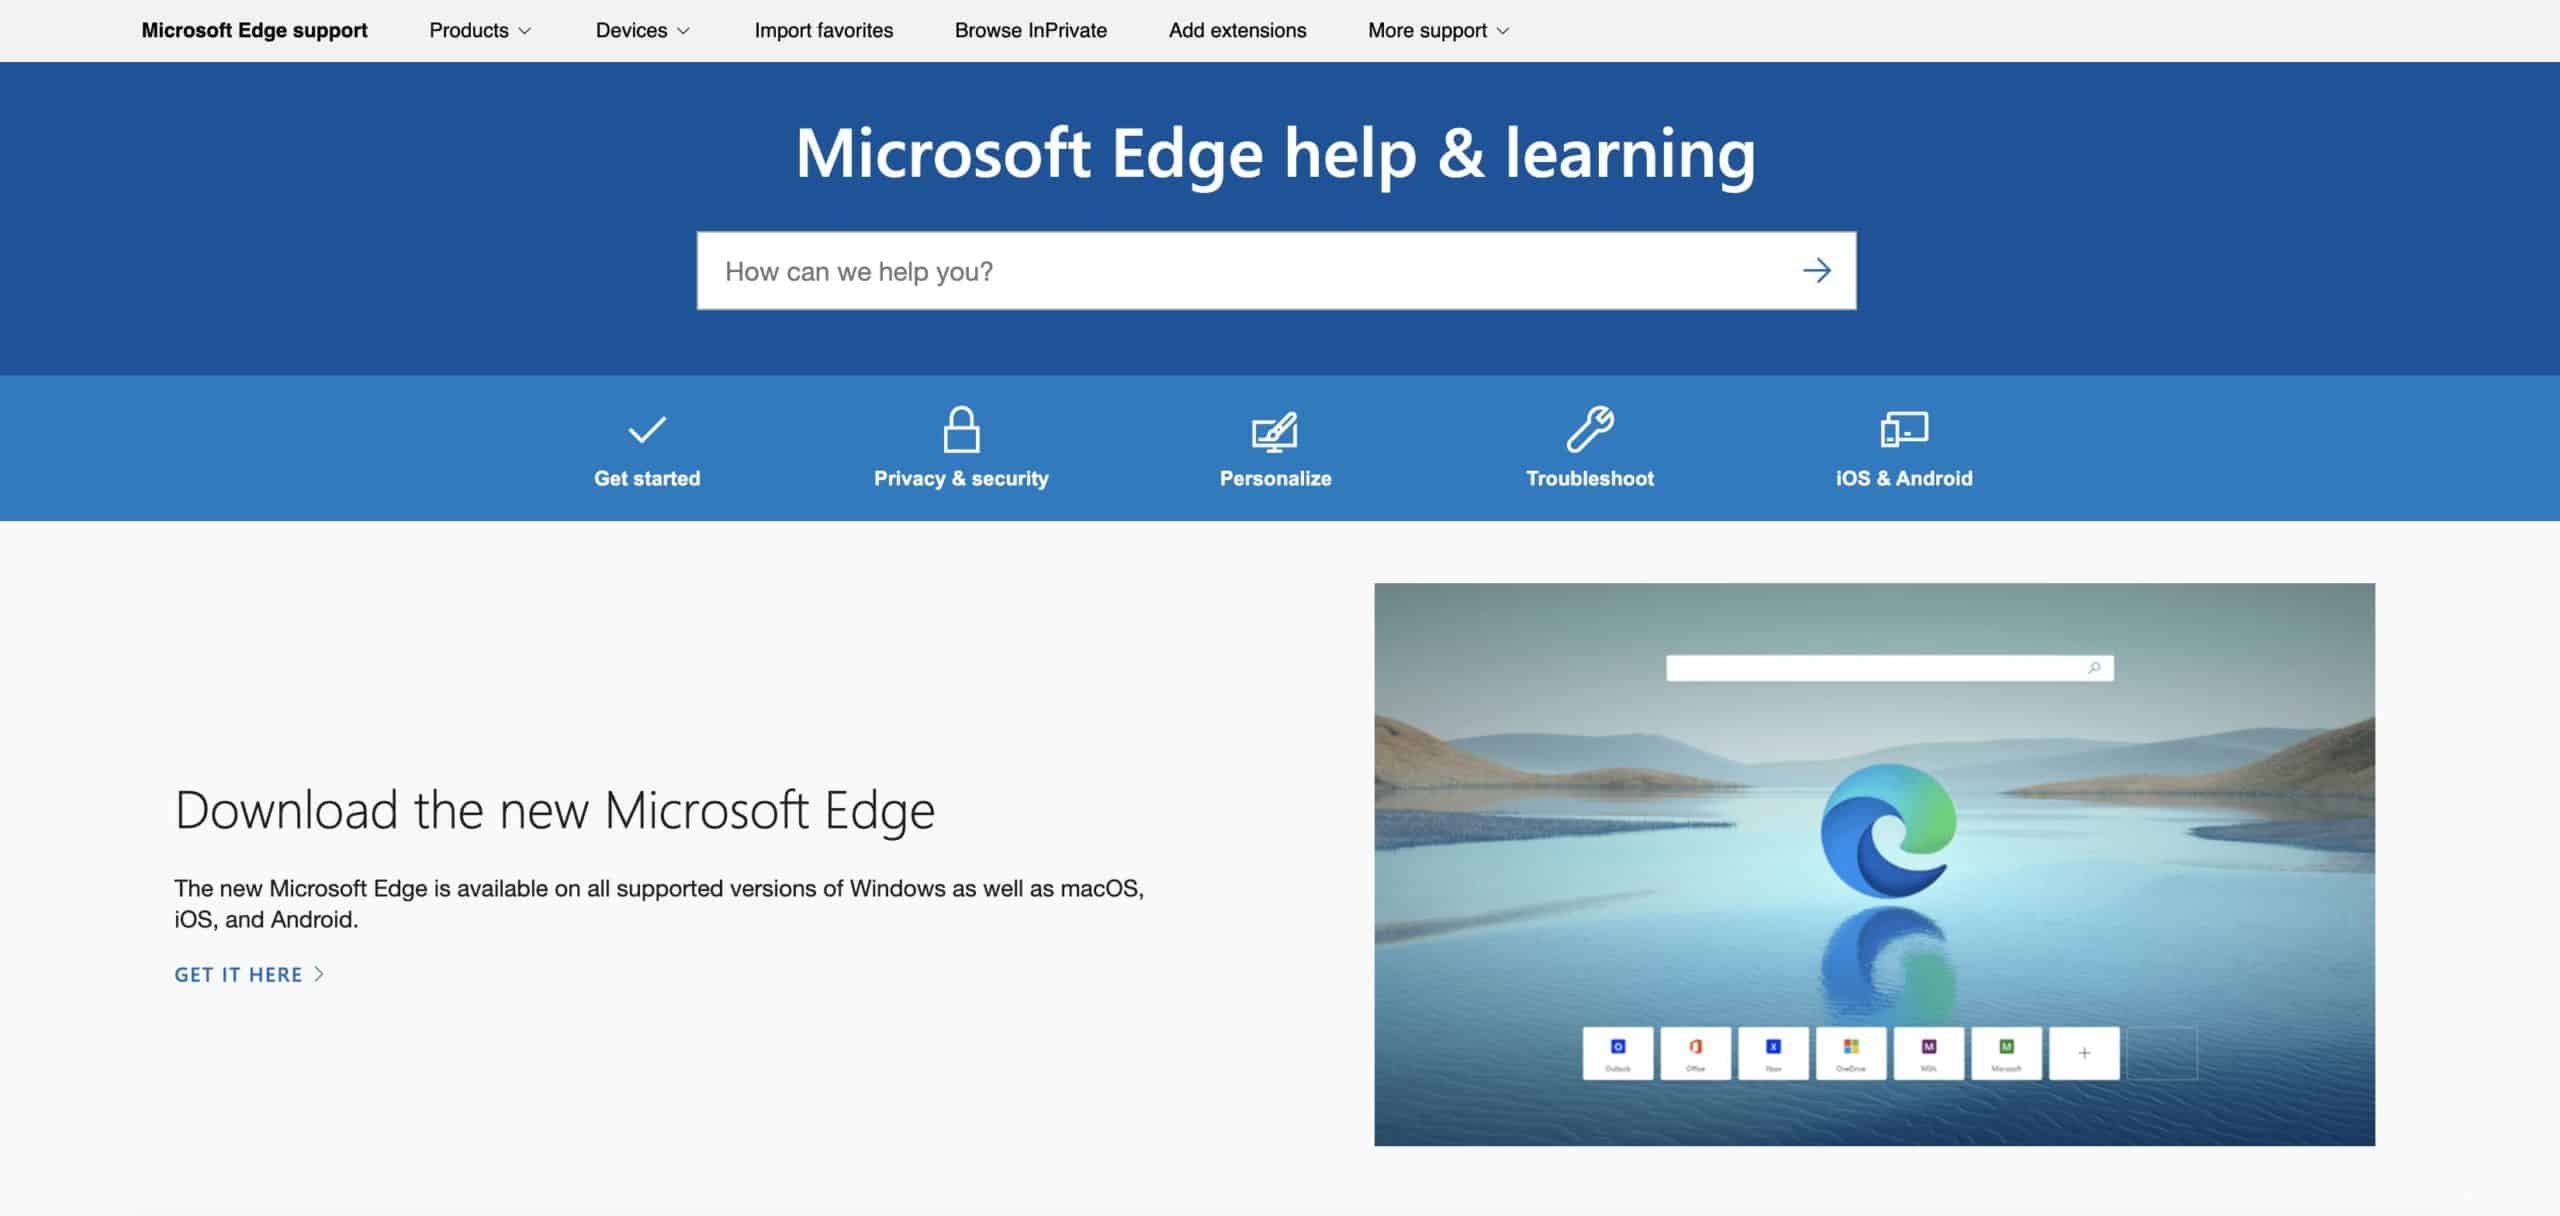 How to use the Microsoft Edge Help section